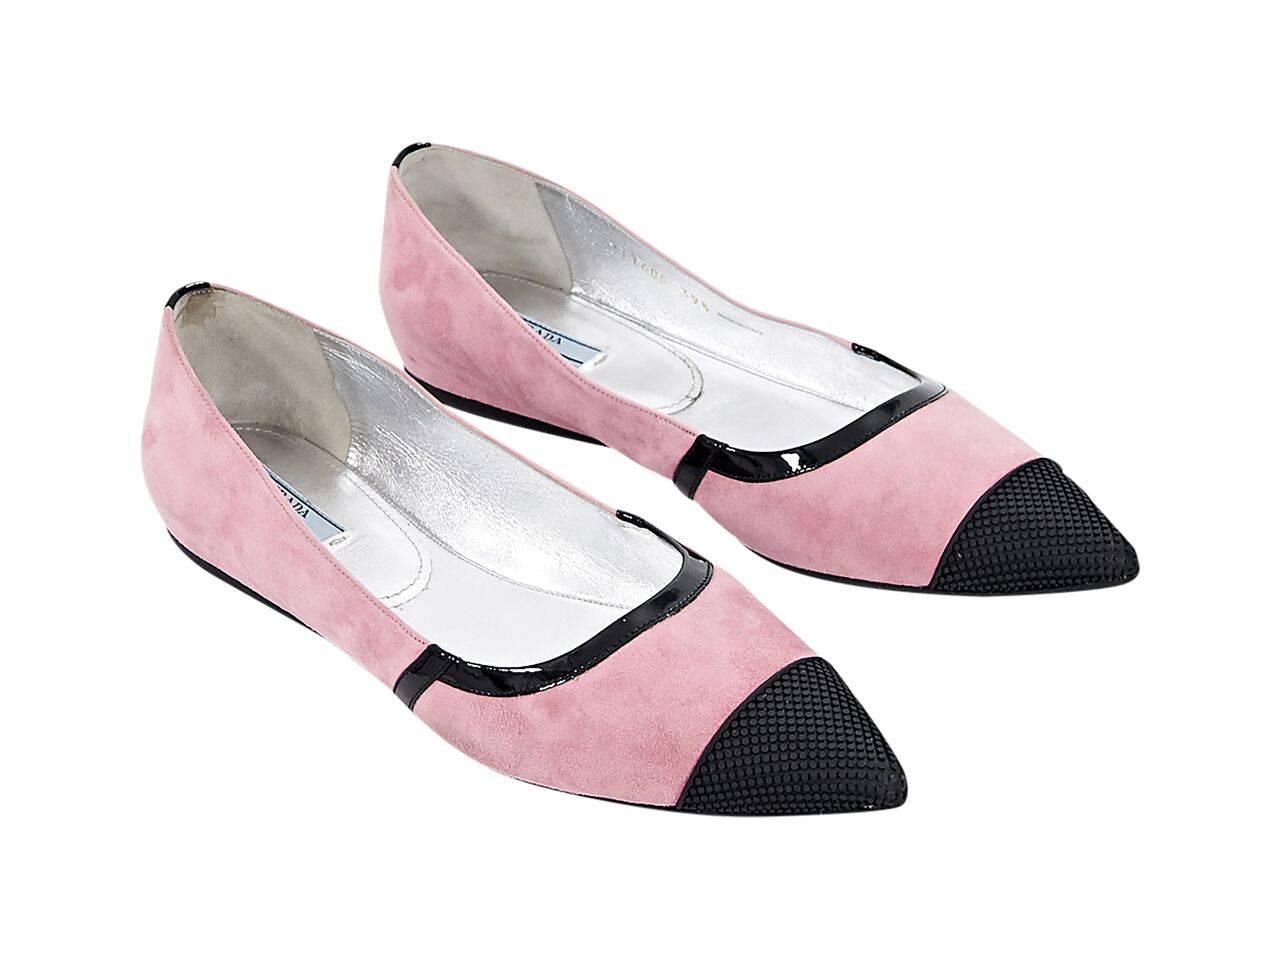 Product details:  Pink suede flats by Prada.  Trimmed with black patent leather.  Rubber point toe.  Slip-on style.  
Condition: Pre-owned. Very good.
Est. Retail $ 435.00